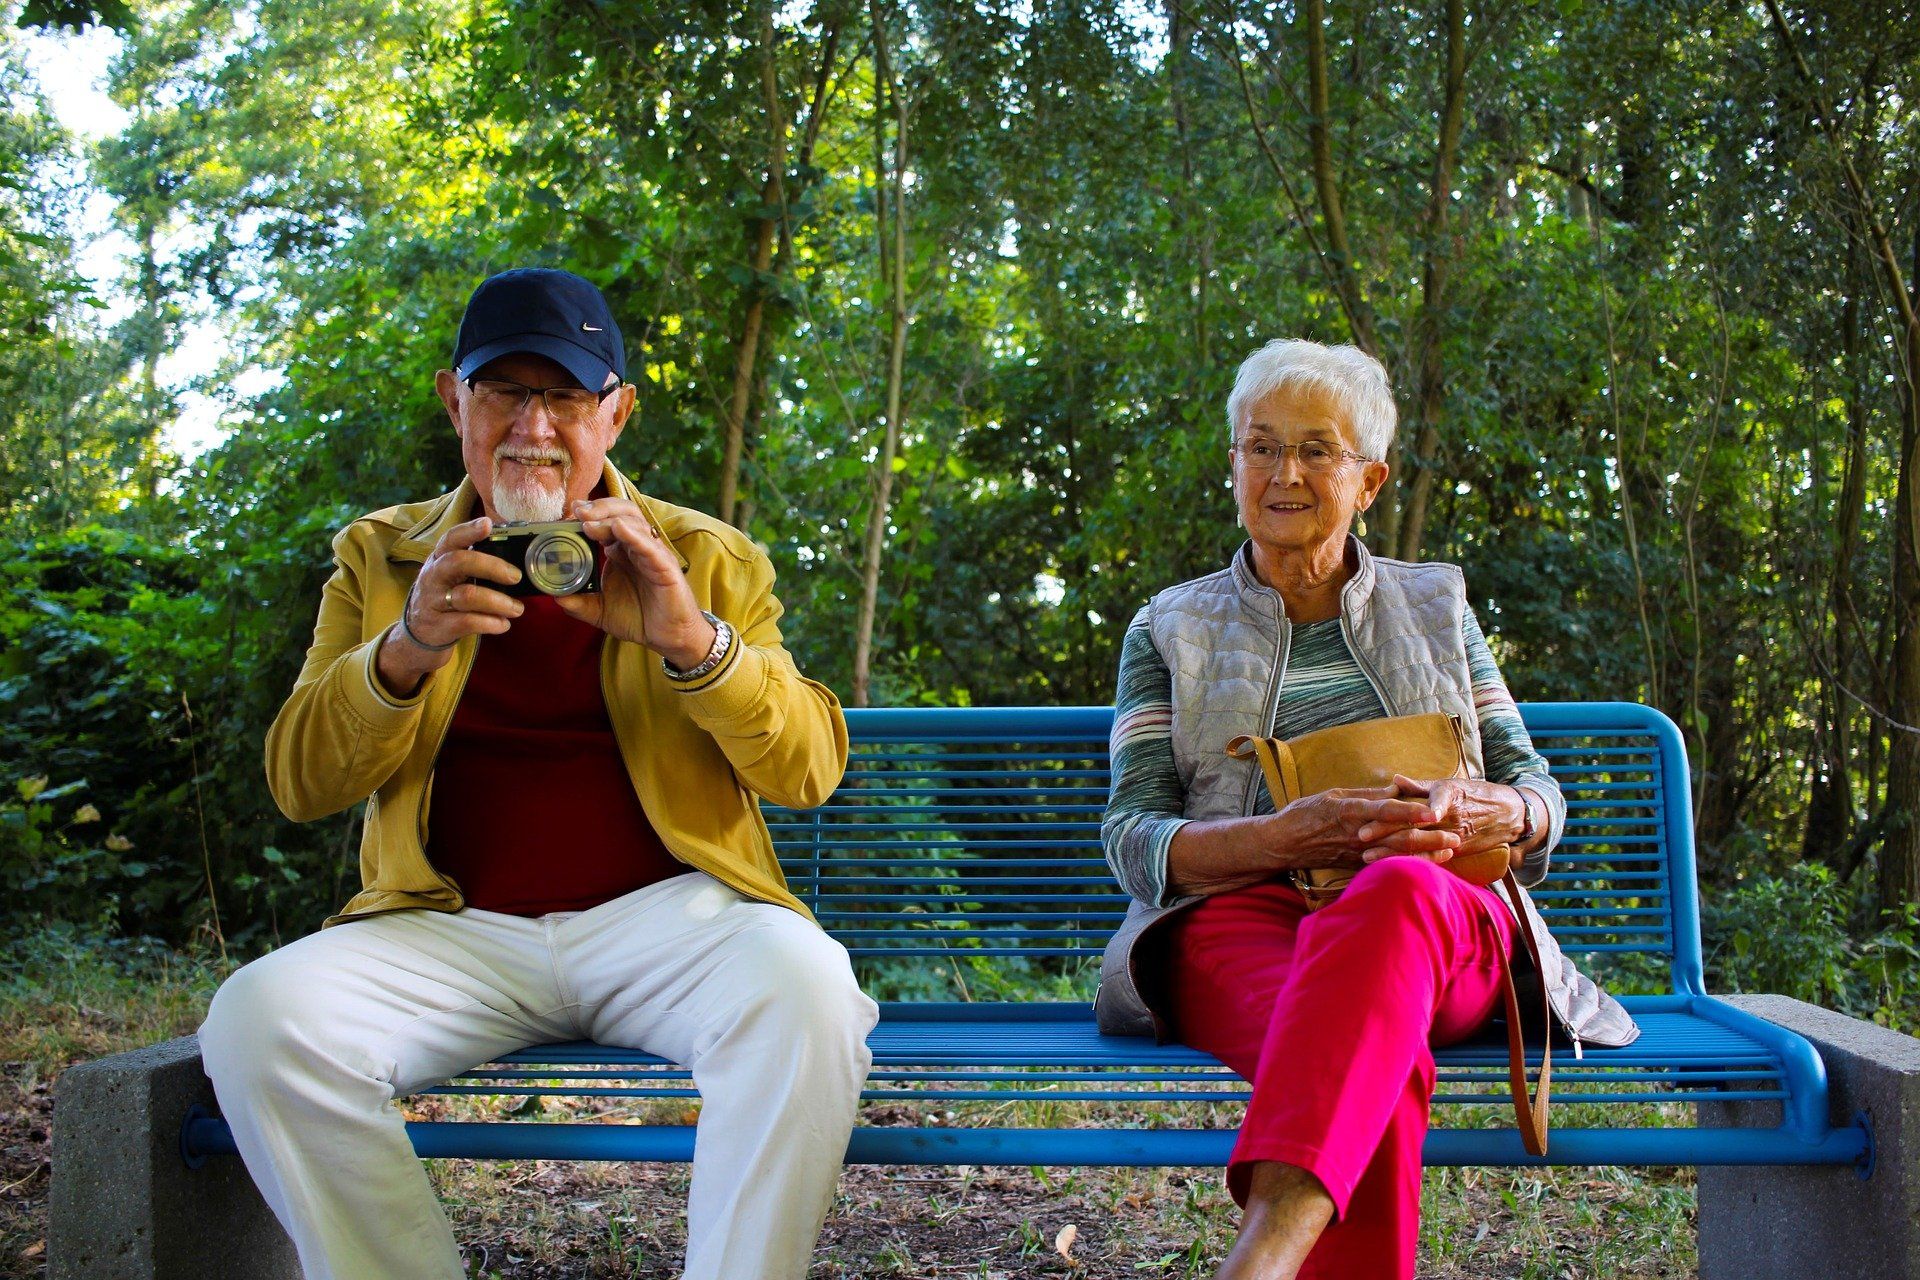 Elderly man and woman sitting on a bench enjoying the nice day.  Optimal Home Care is dedicated to helping clients achieve quality of life.